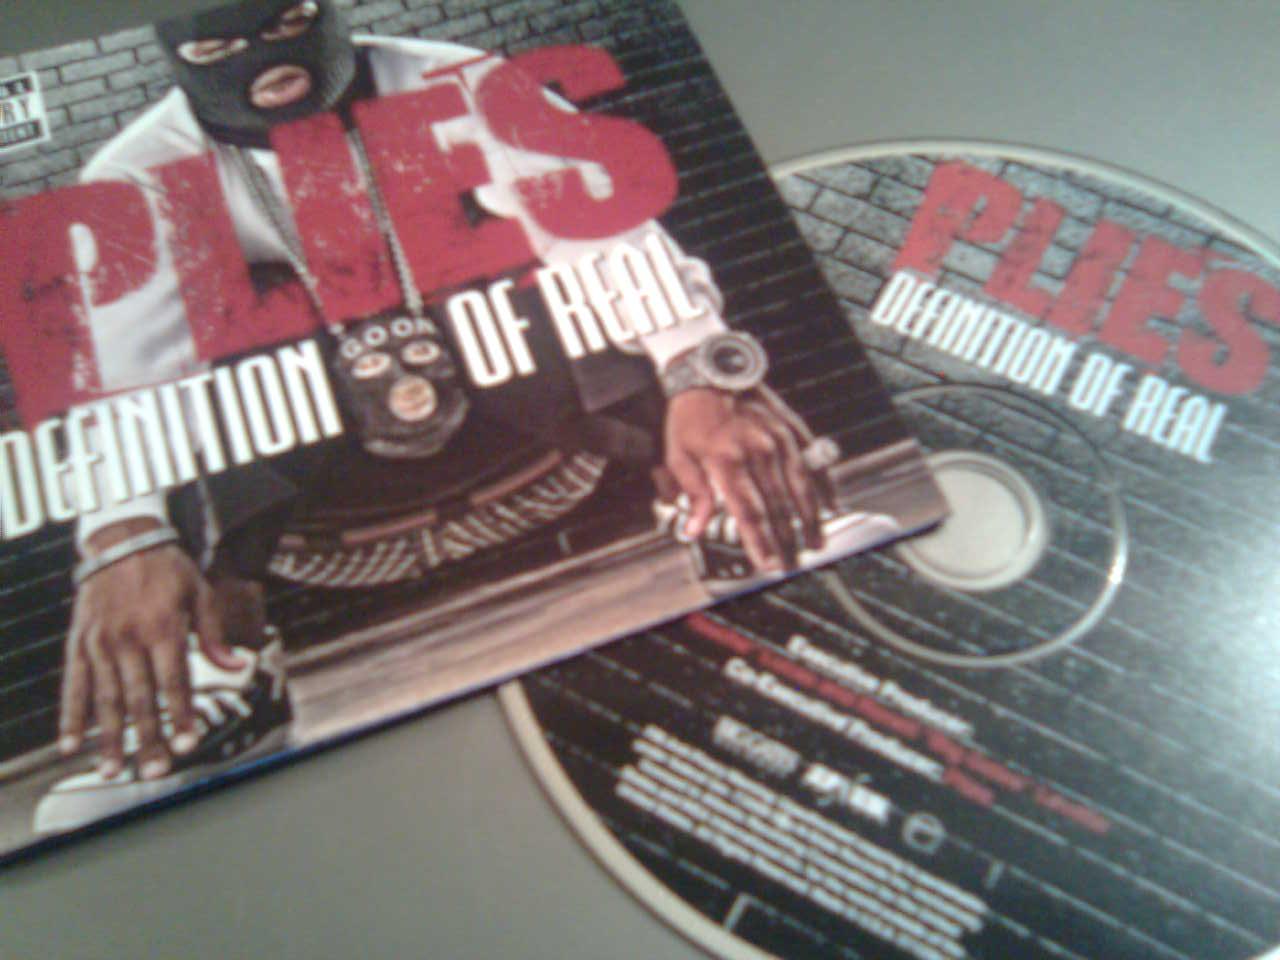 [plies-definition_of_real-2008-scan.jpg]